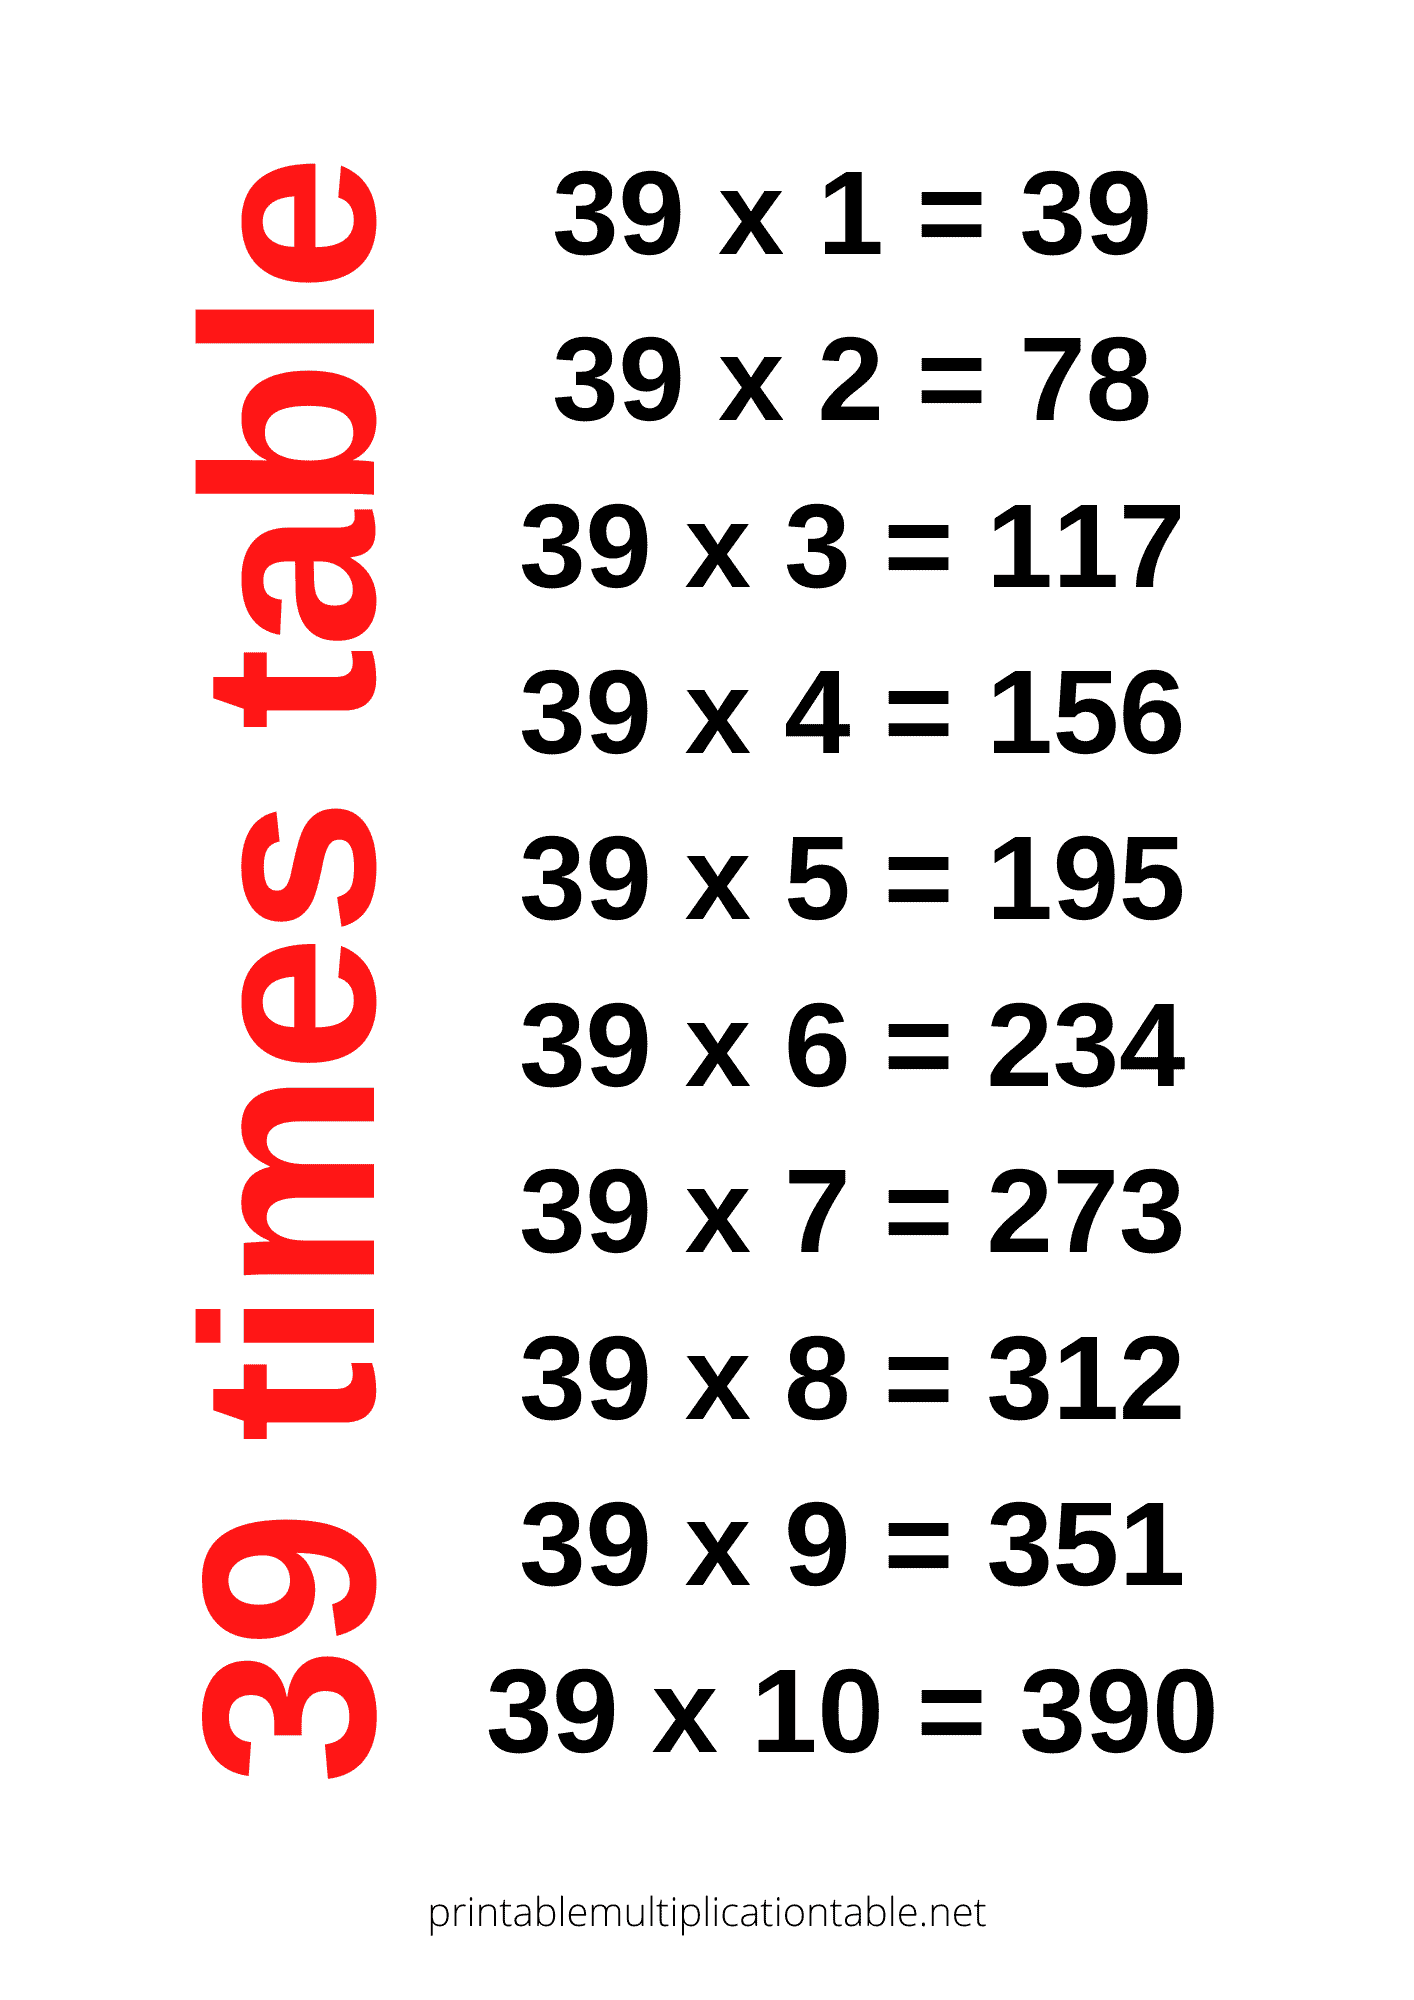 39 times table chart